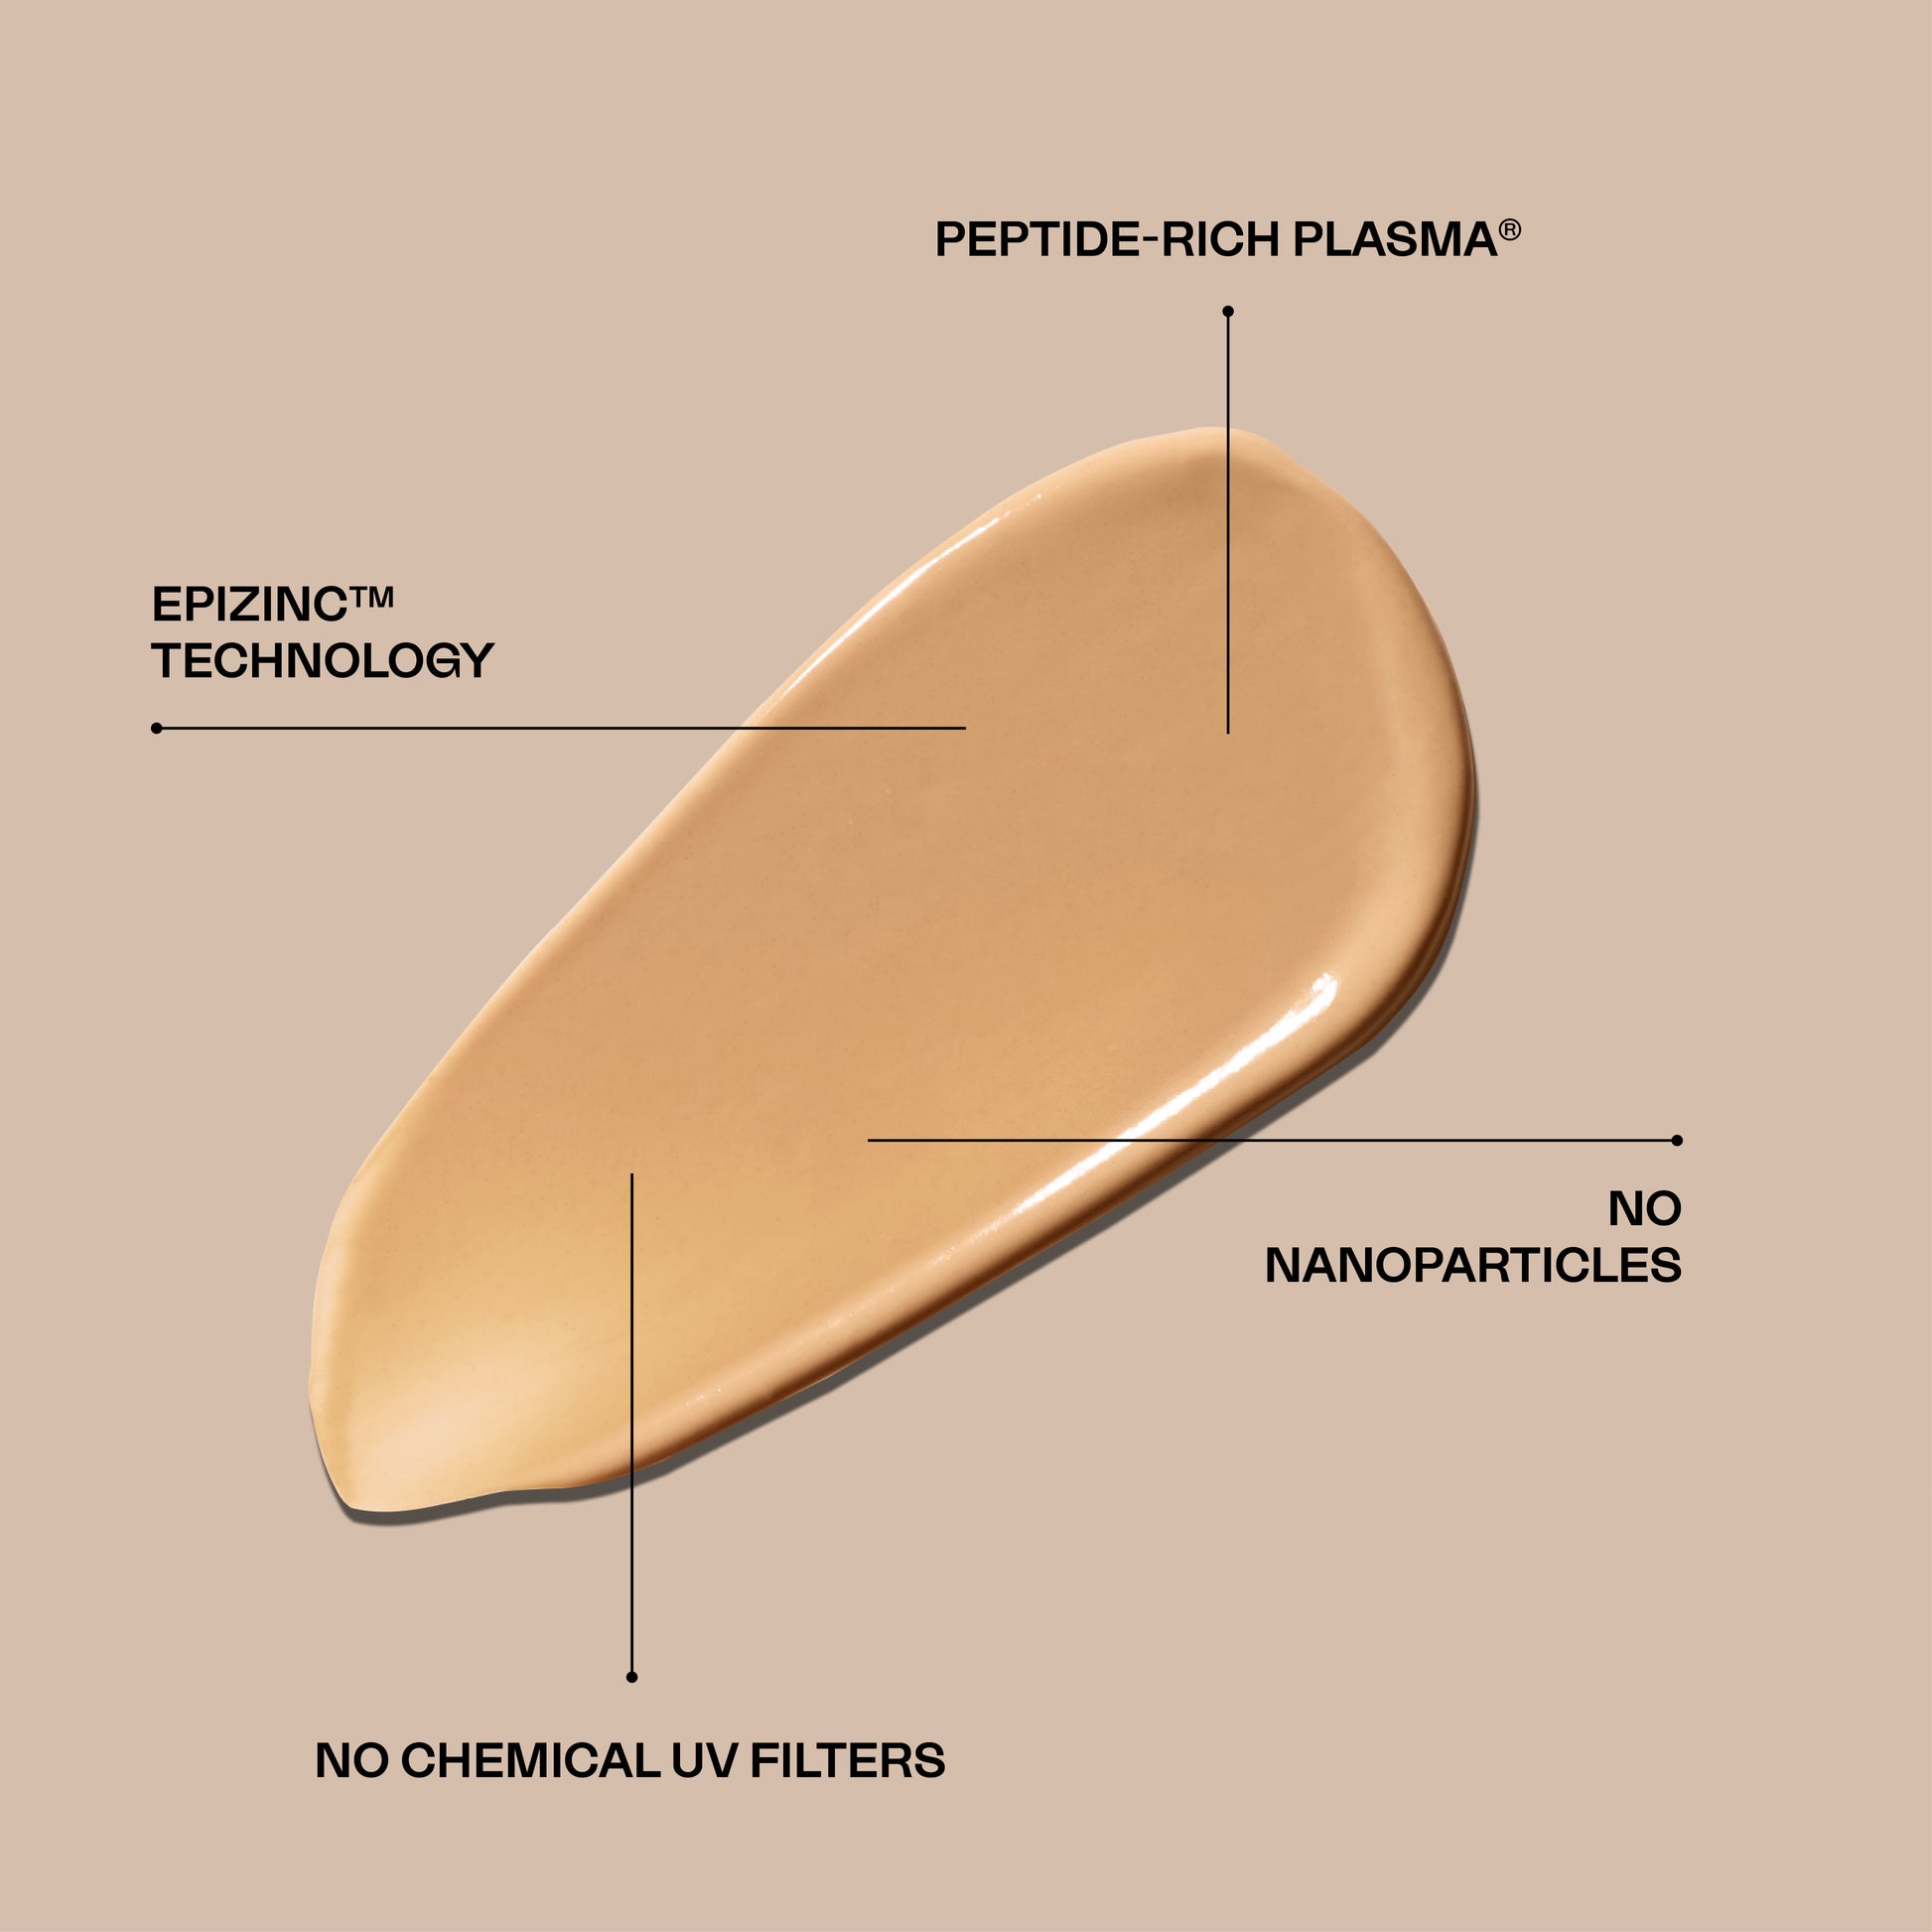 Eighth Day Skin The Rejuvenating Moisturizing Primer Broad Spectrum SPF 30 is formulated with peptide-rich plasma, Epizinc Technology, non-nanoparticles, and no chemical UV filters.